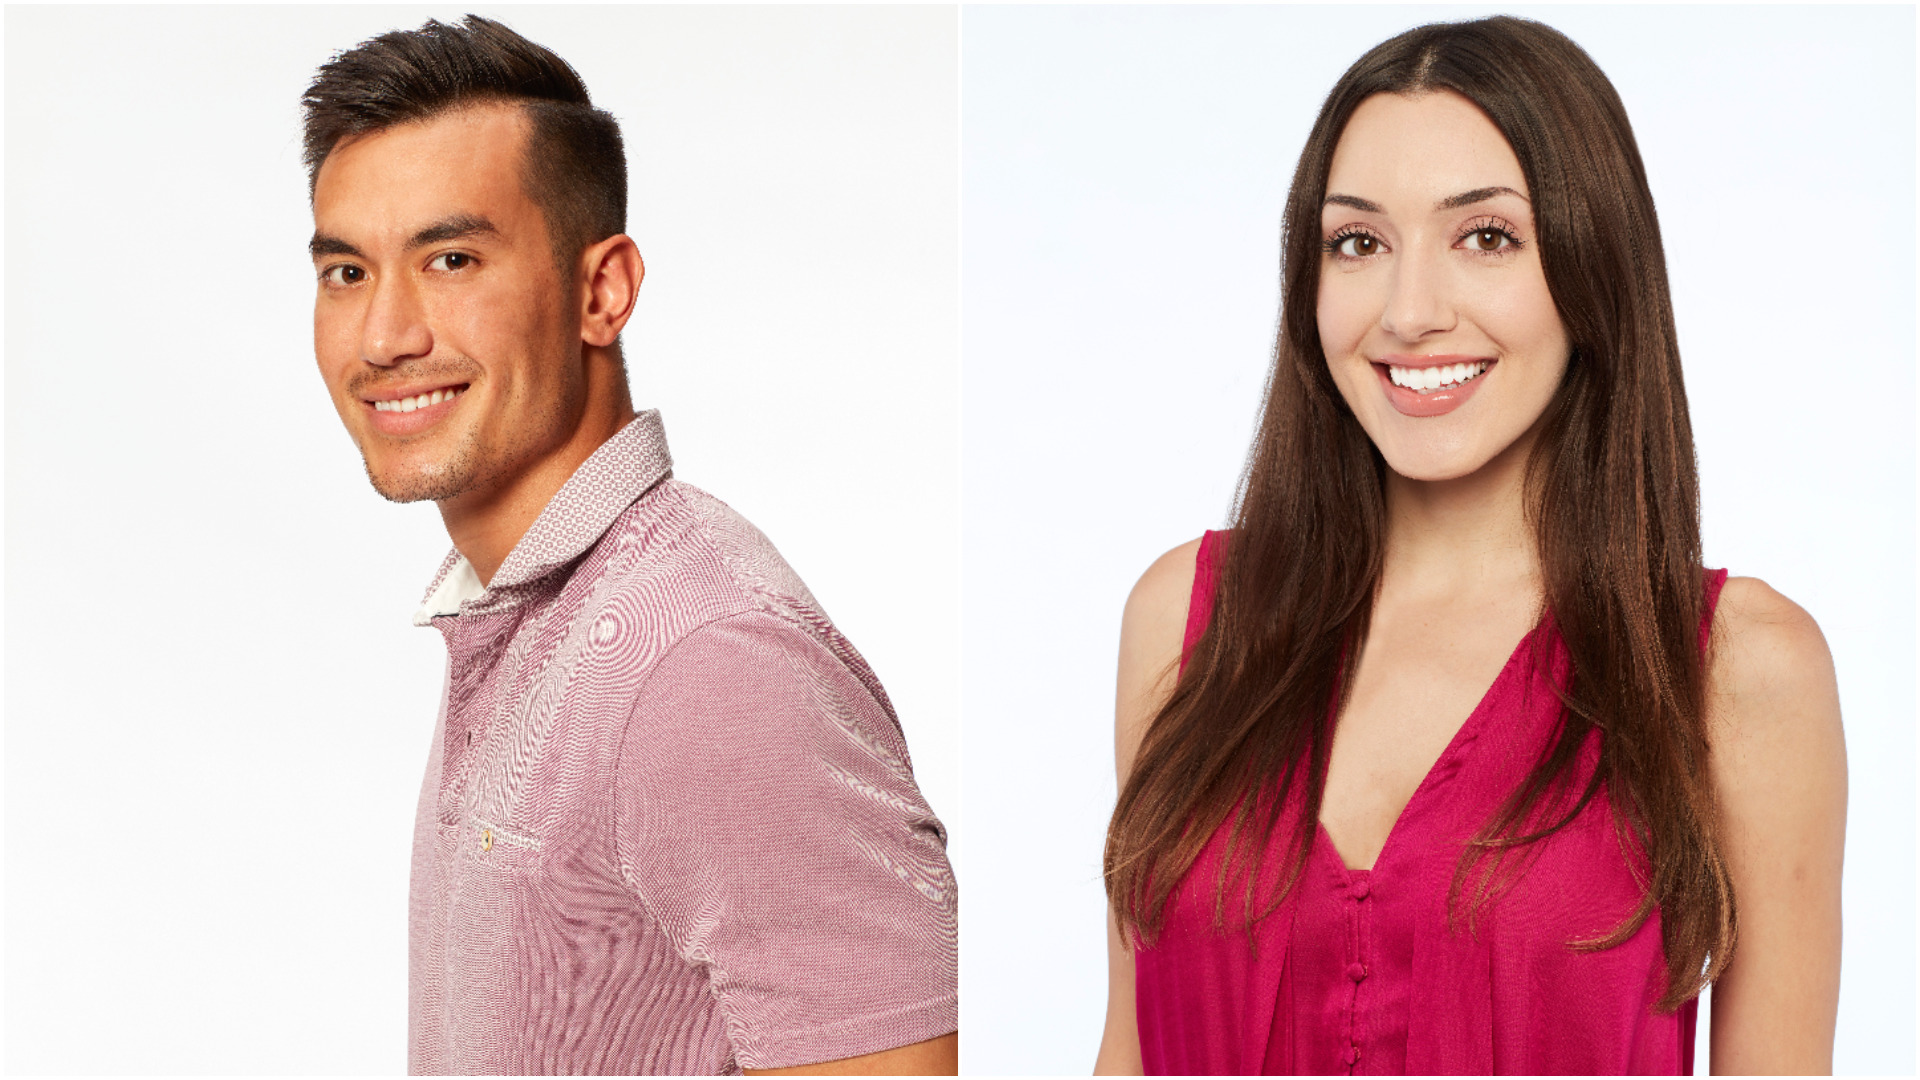 Headshots of Chris Conran and Alana Milne from ‘Bachelor in Paradise’